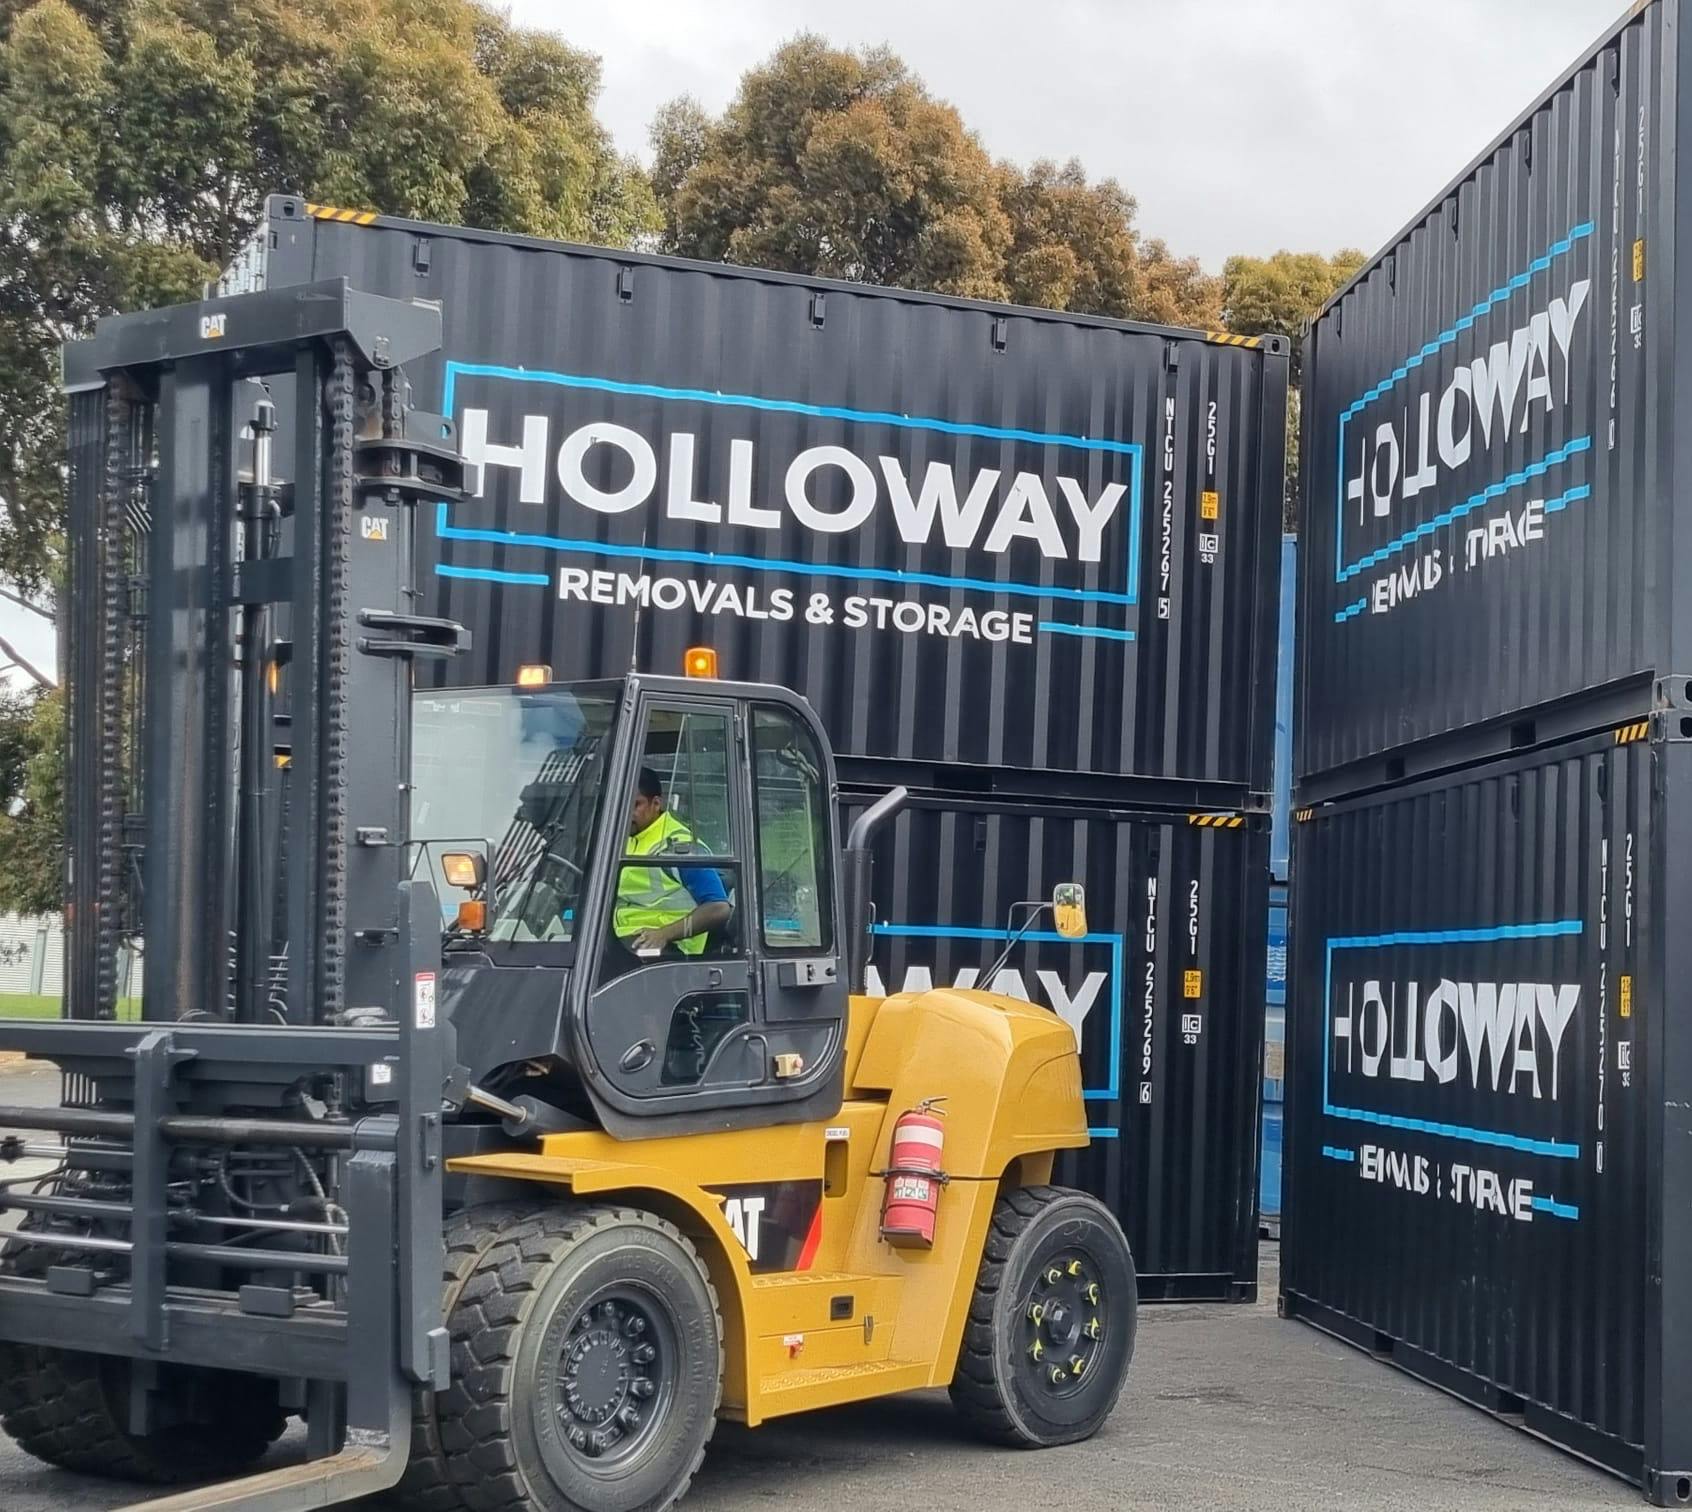 Container Storage, The Holloway Way